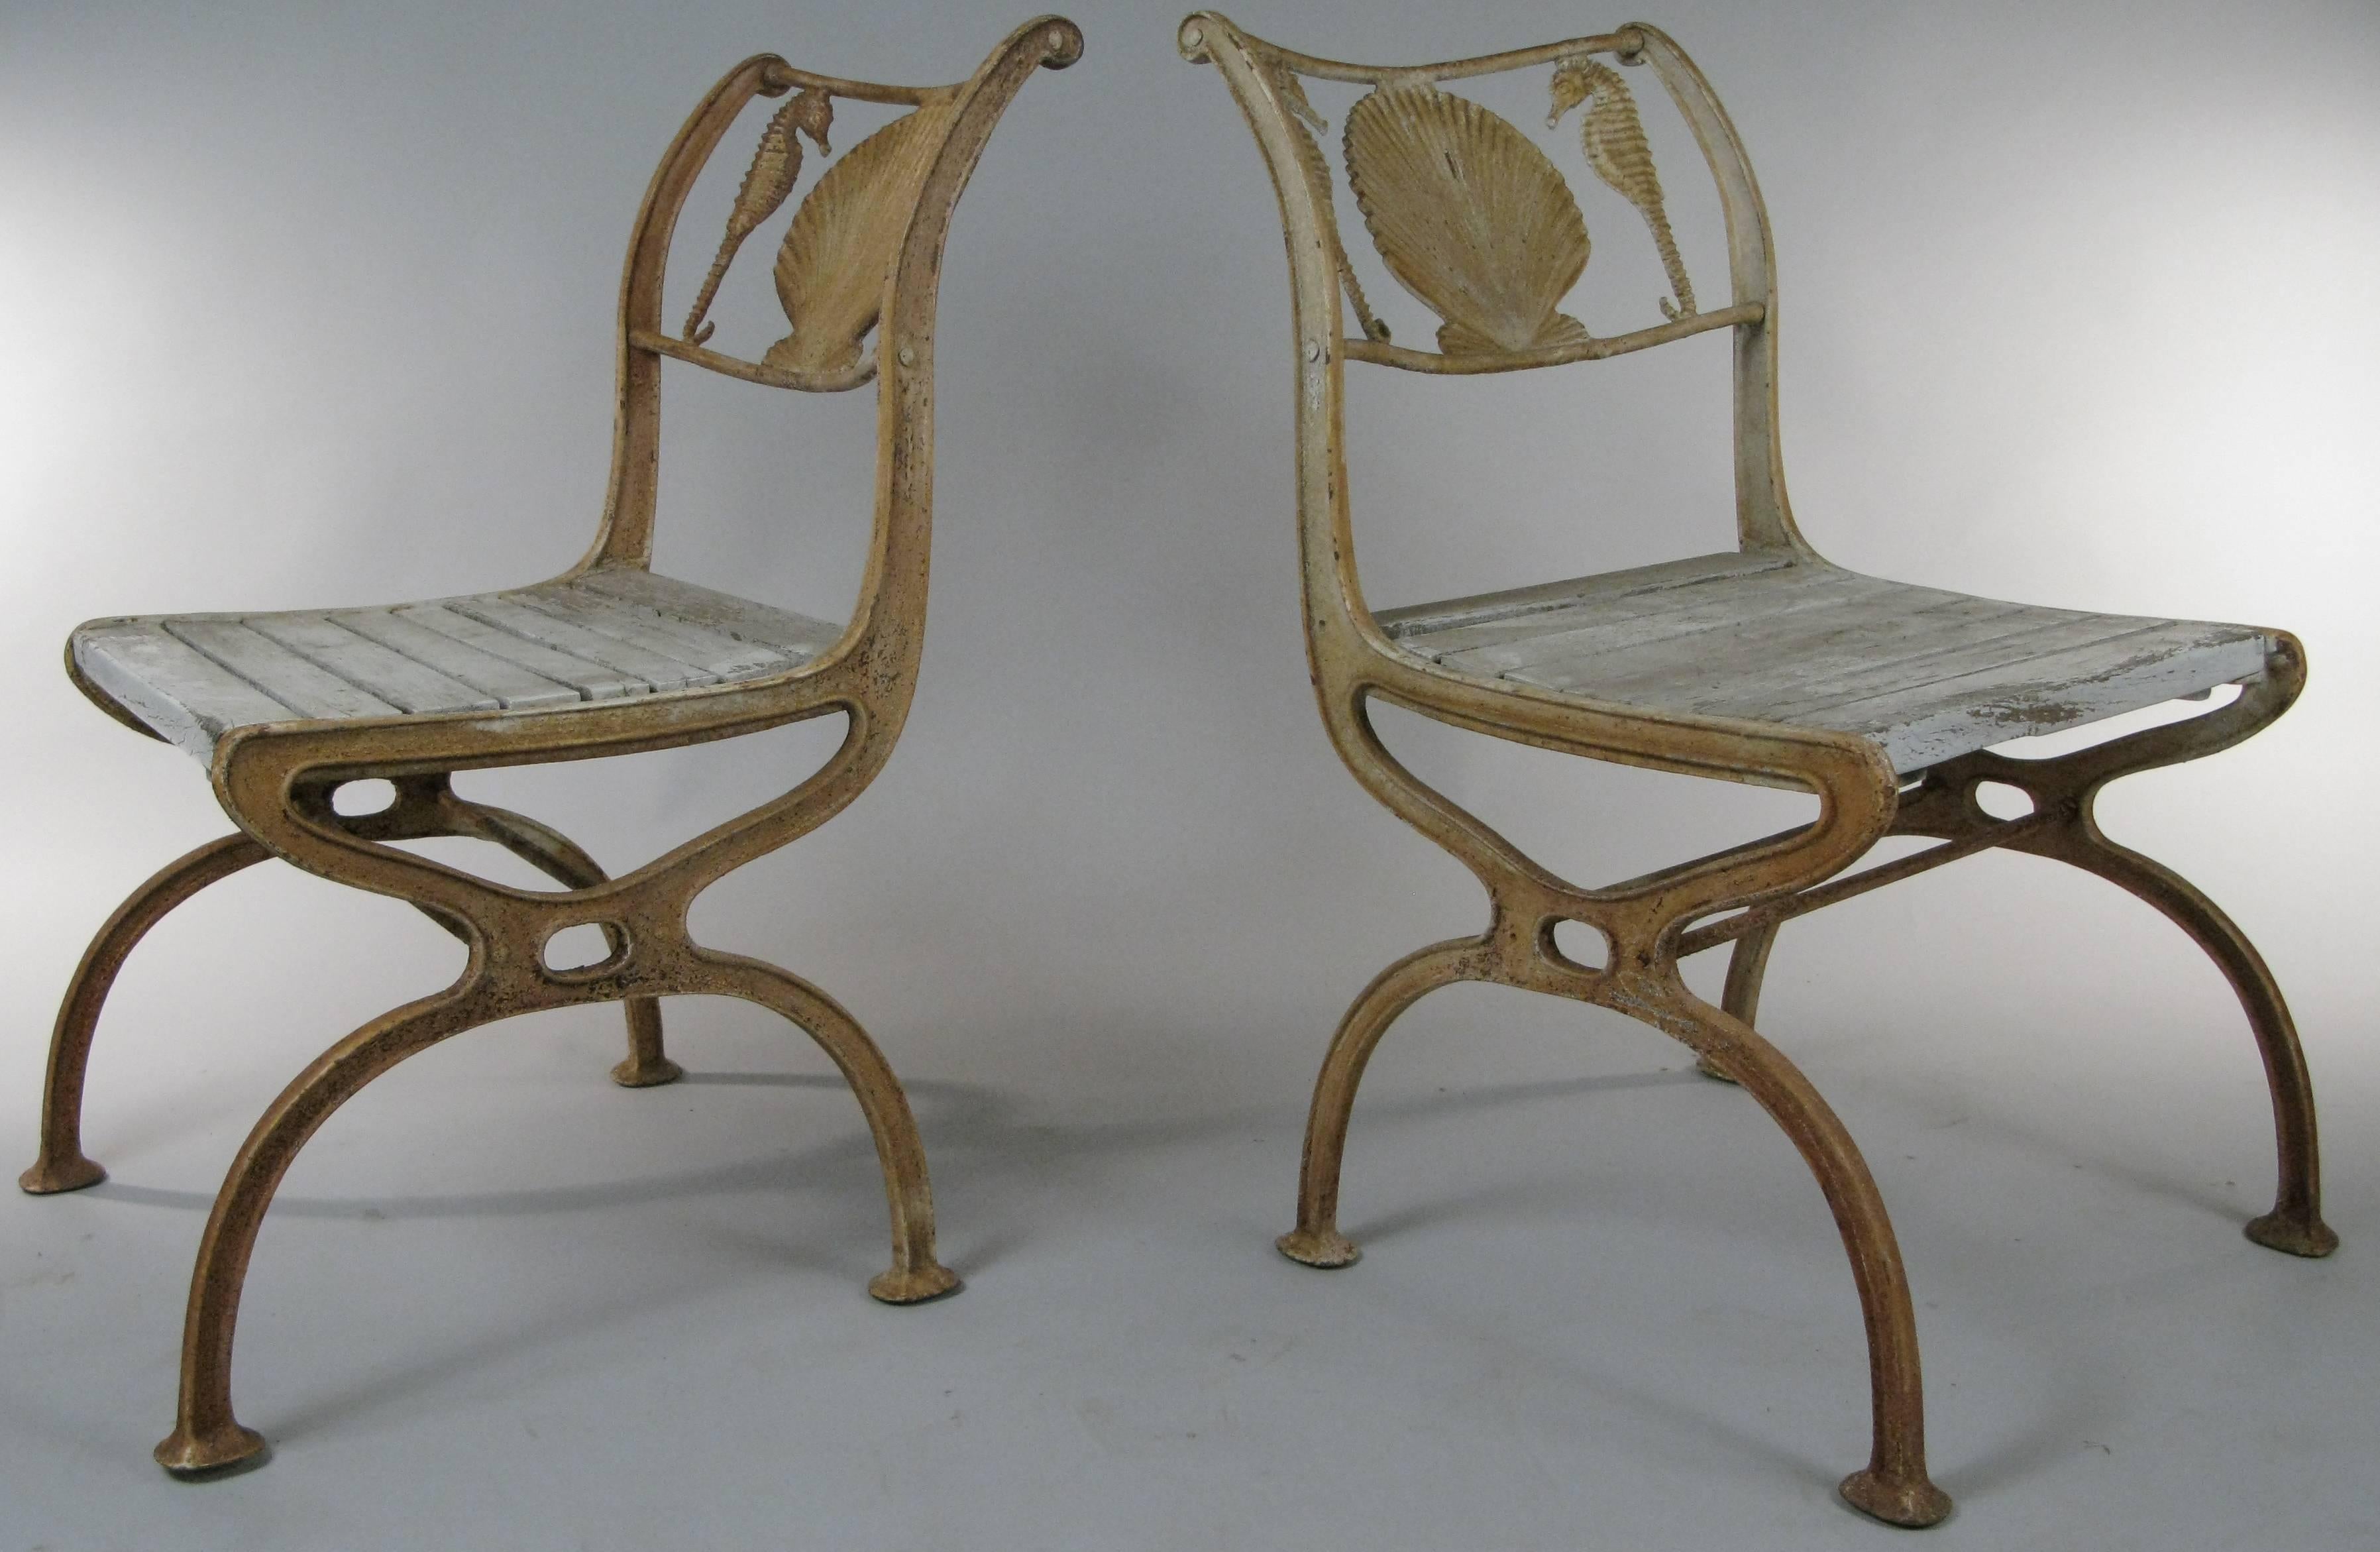 A pair of antique 1920s cast iron chairs with a seashell and seahorse motif in the curved frieze on the back of the chair. This is a rare design and we have four chairs total, priced as pairs.